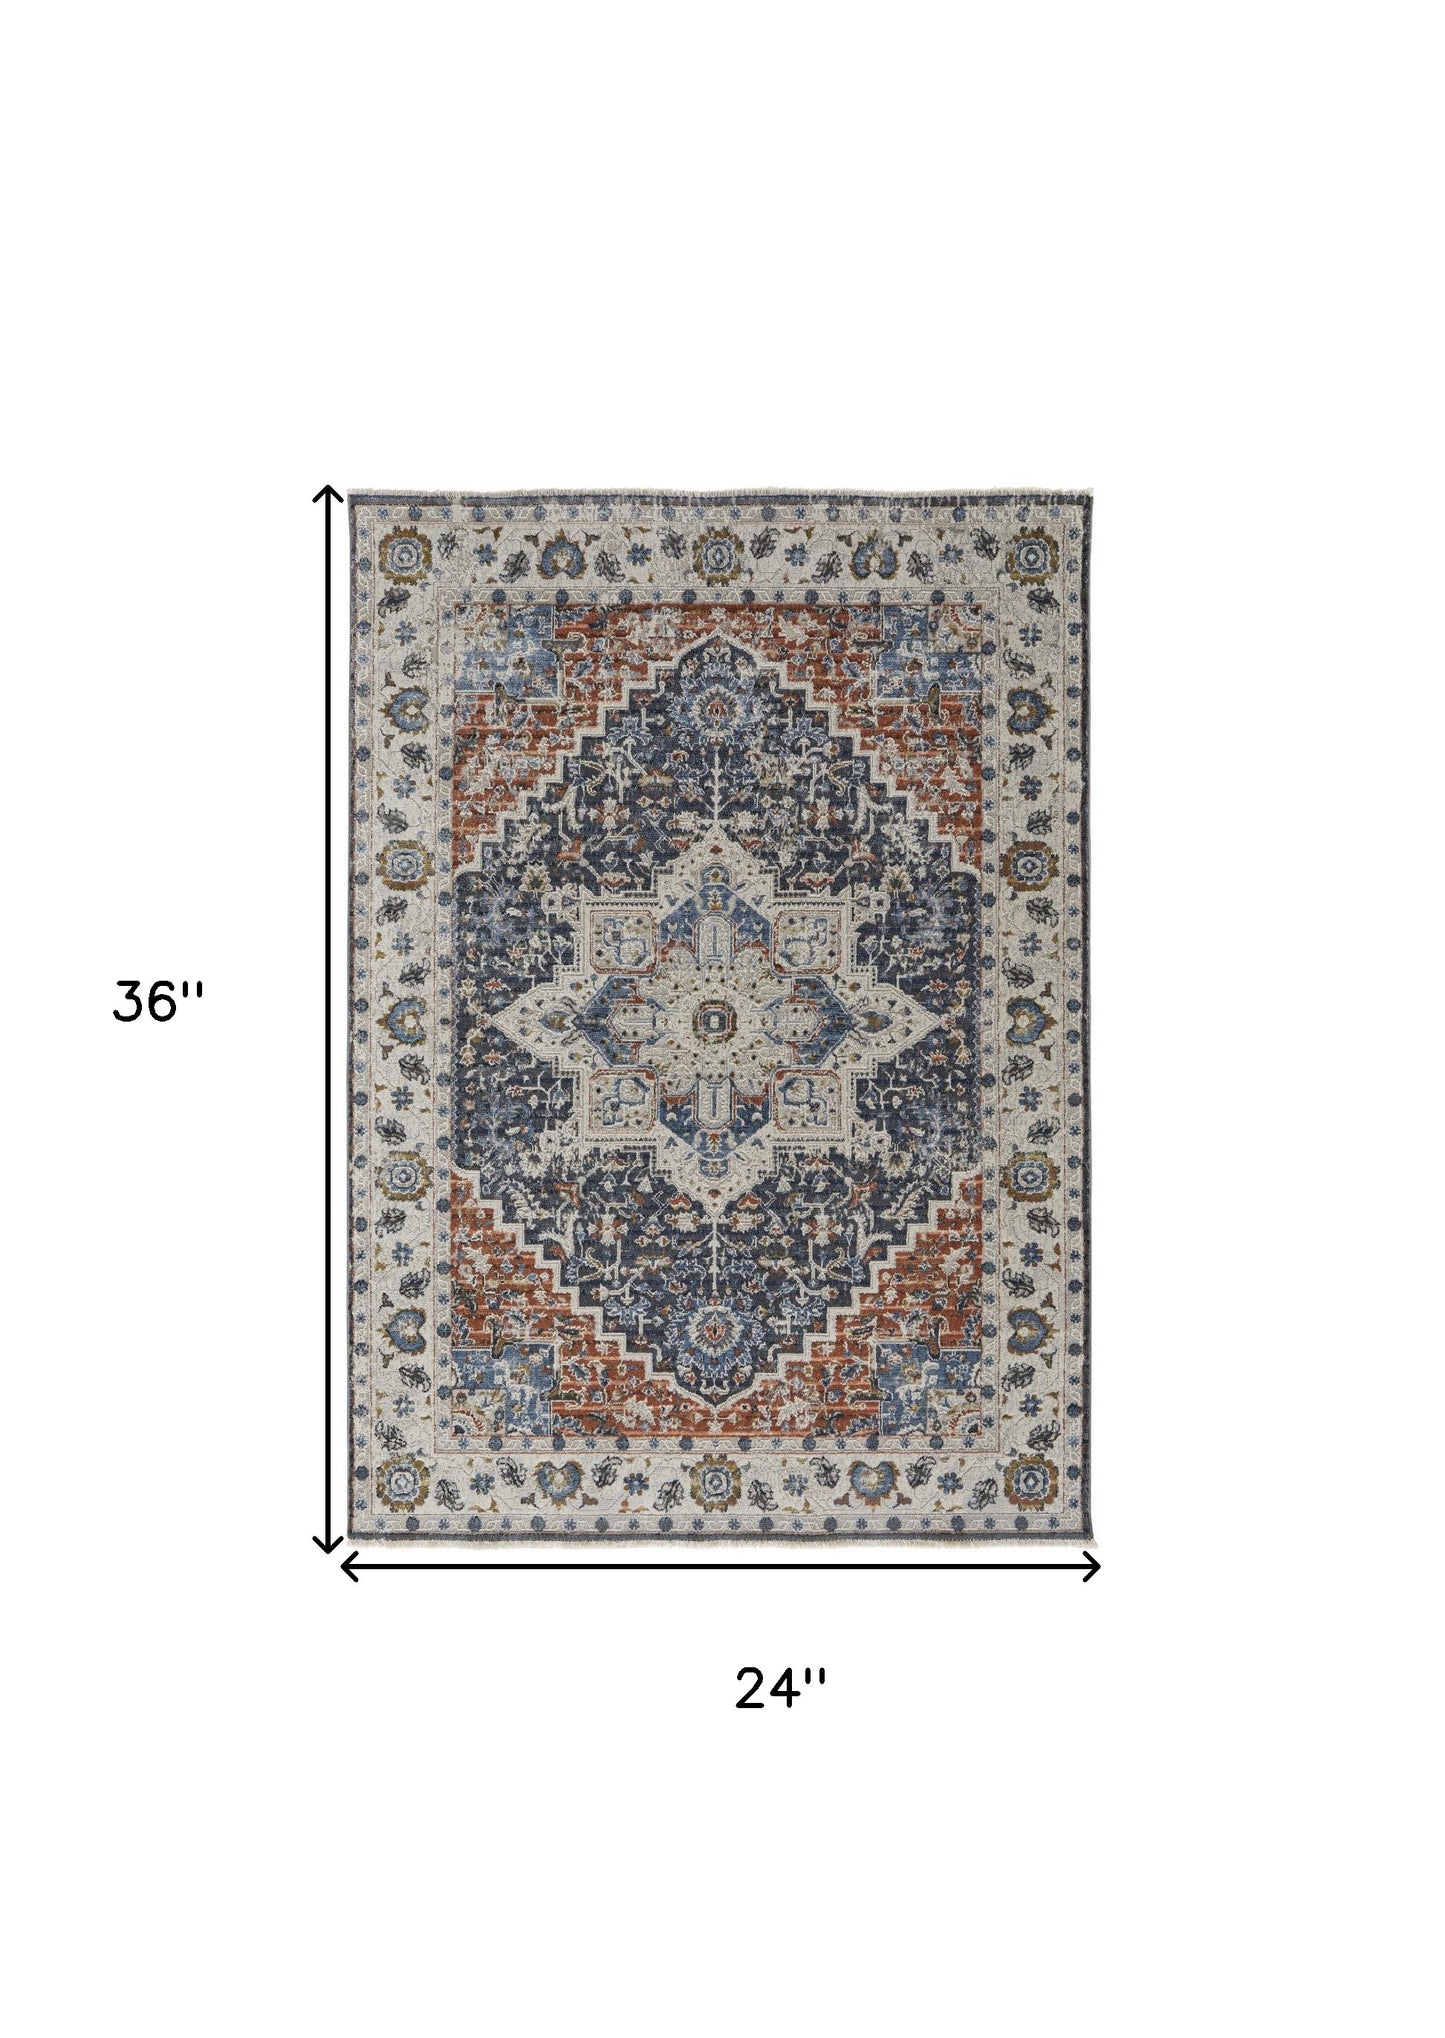 5' X 8' Ivory Blue And Red Floral Power Loom Area Rug With Fringe